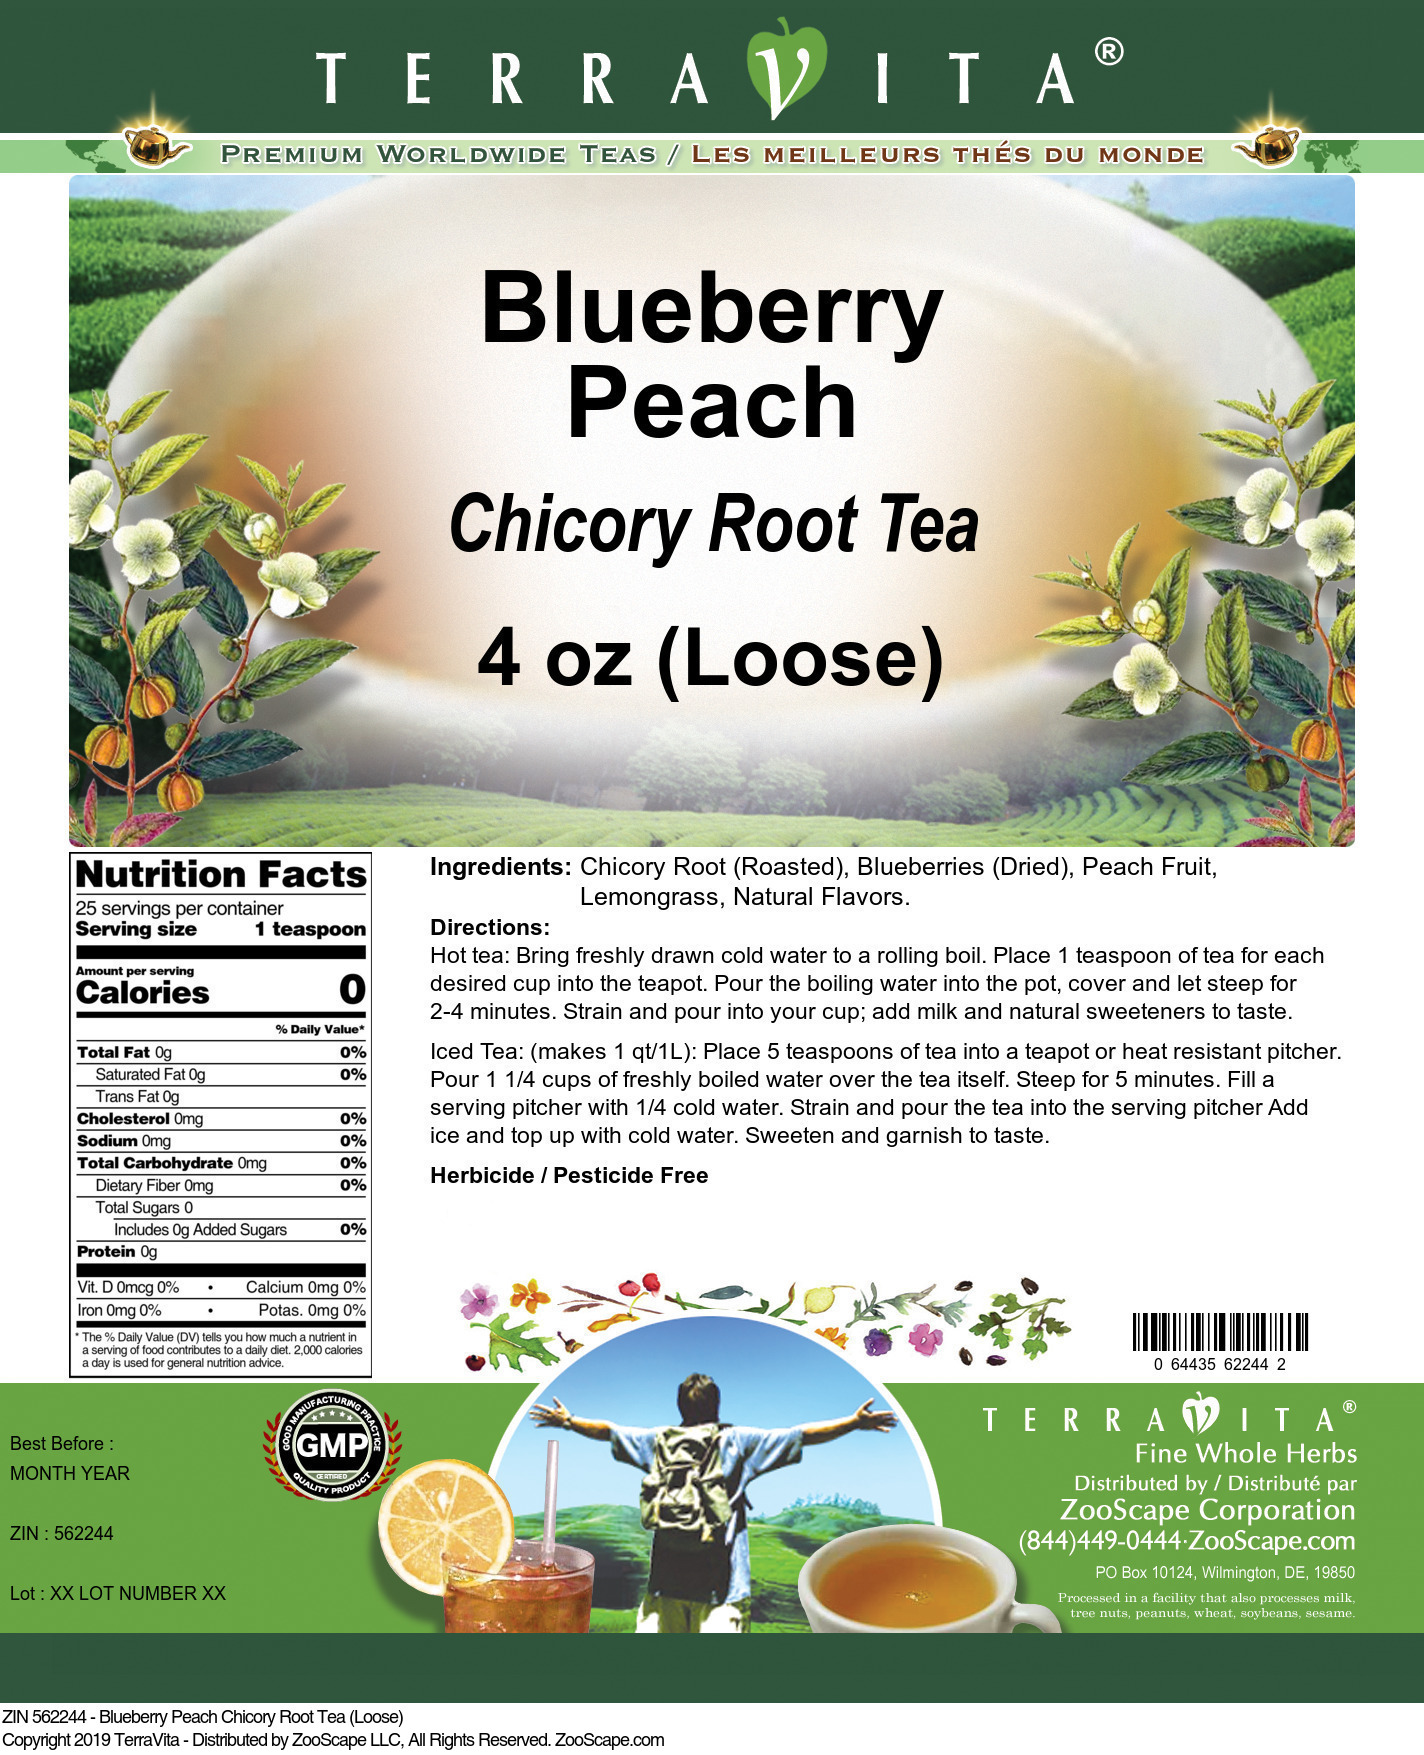 Blueberry Peach Chicory Root Tea (Loose) - Label